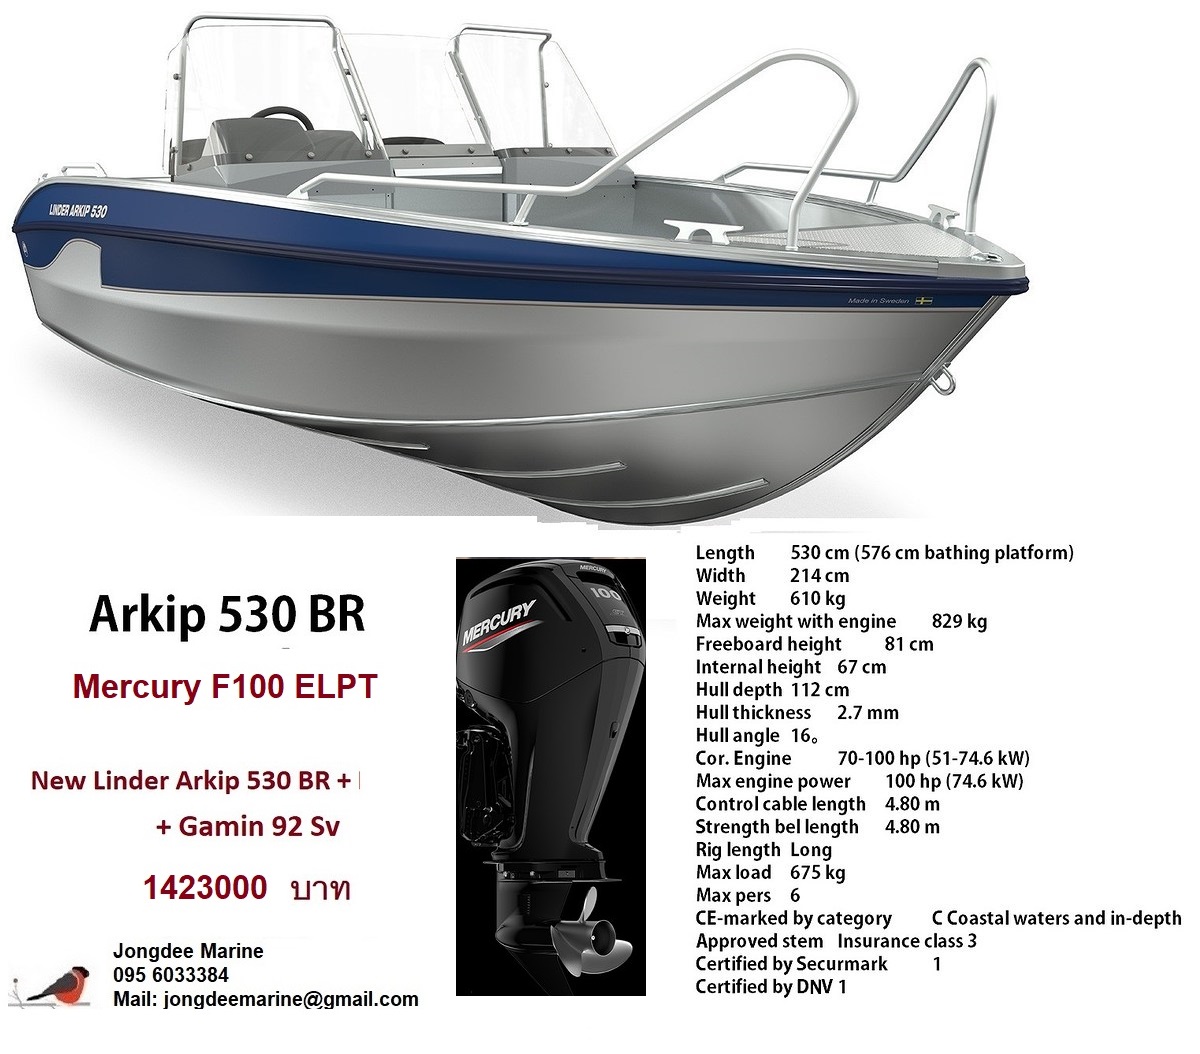 The Arkip 530 BR is a large boat that can accommodate up to 6 people. A boat well adapted for longer